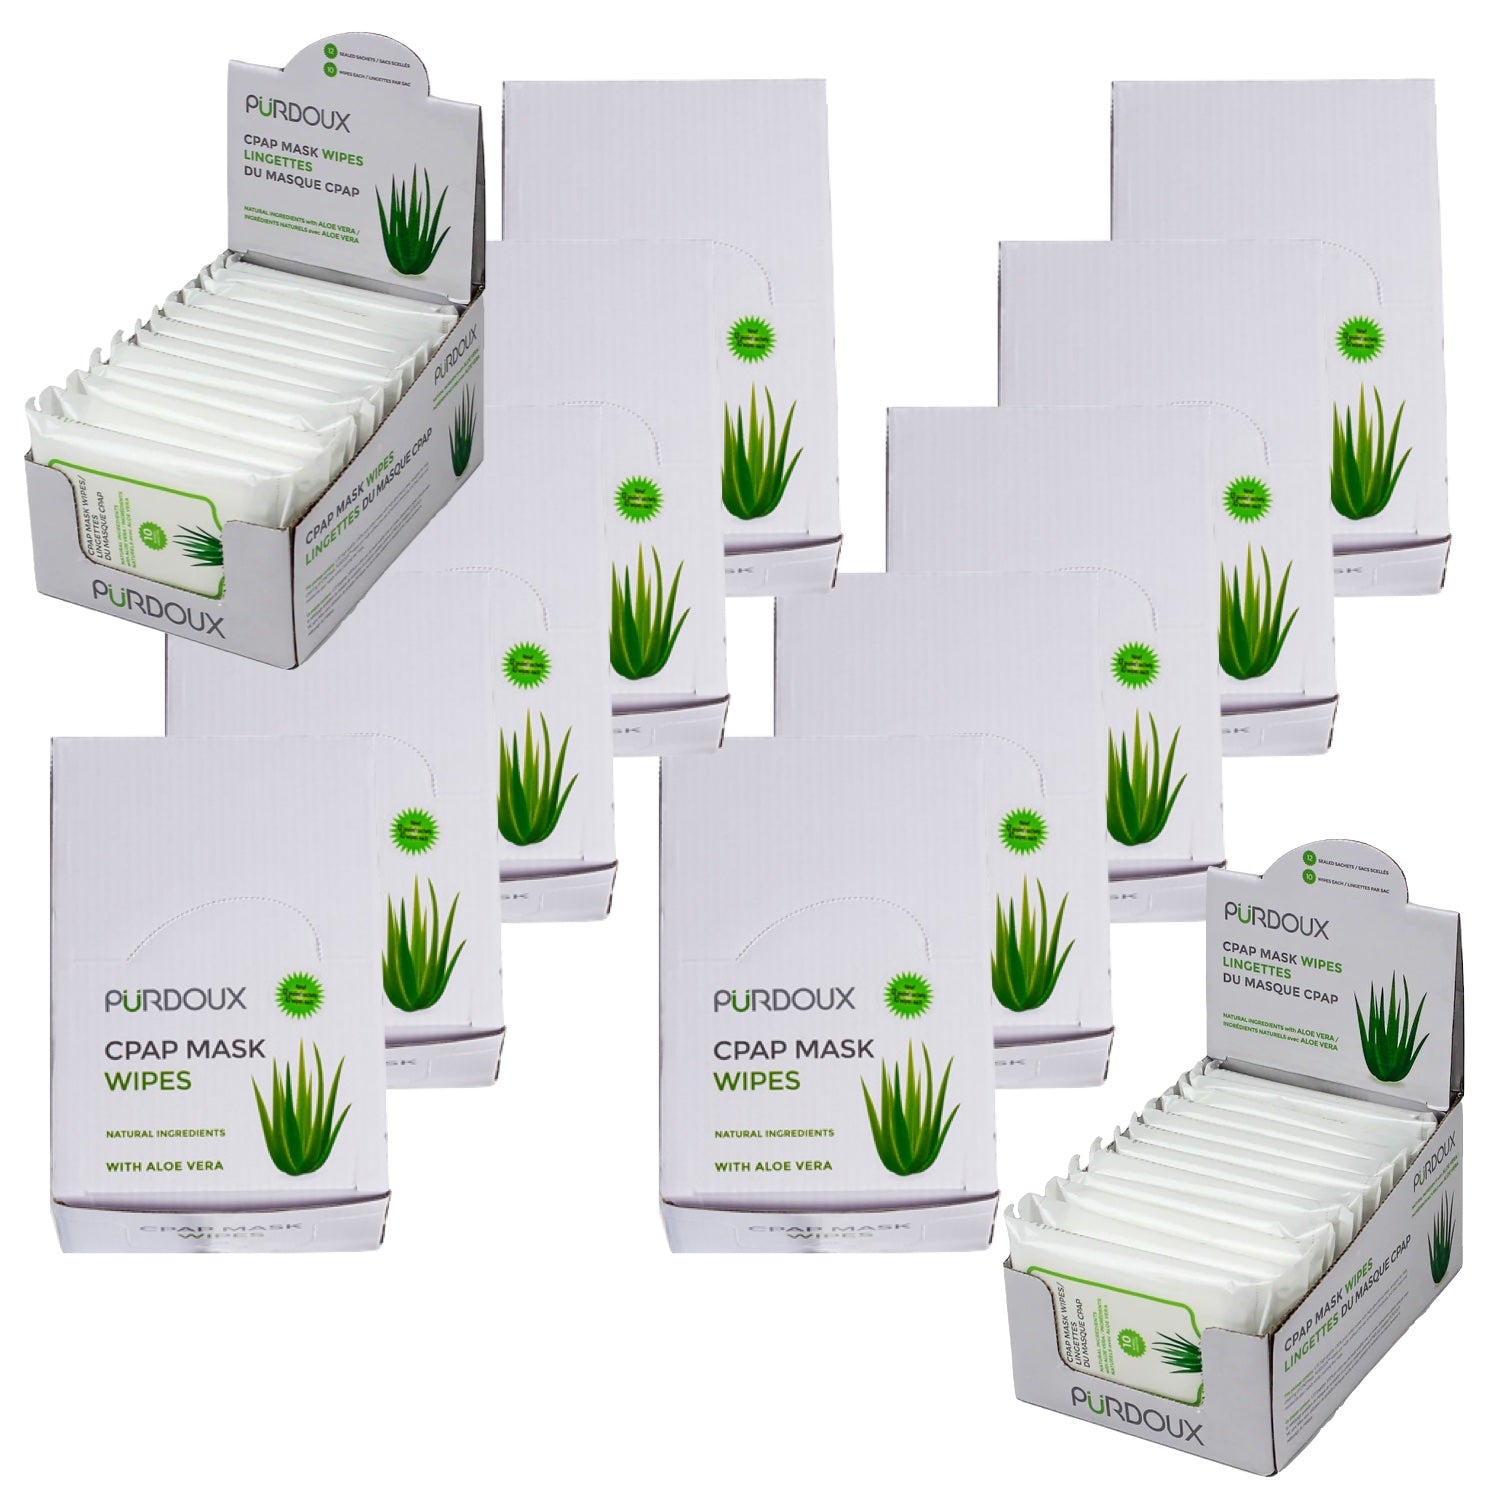 PURDOUX CPAP Aloe Vera Unscented Wipes Travel Box - case of 12